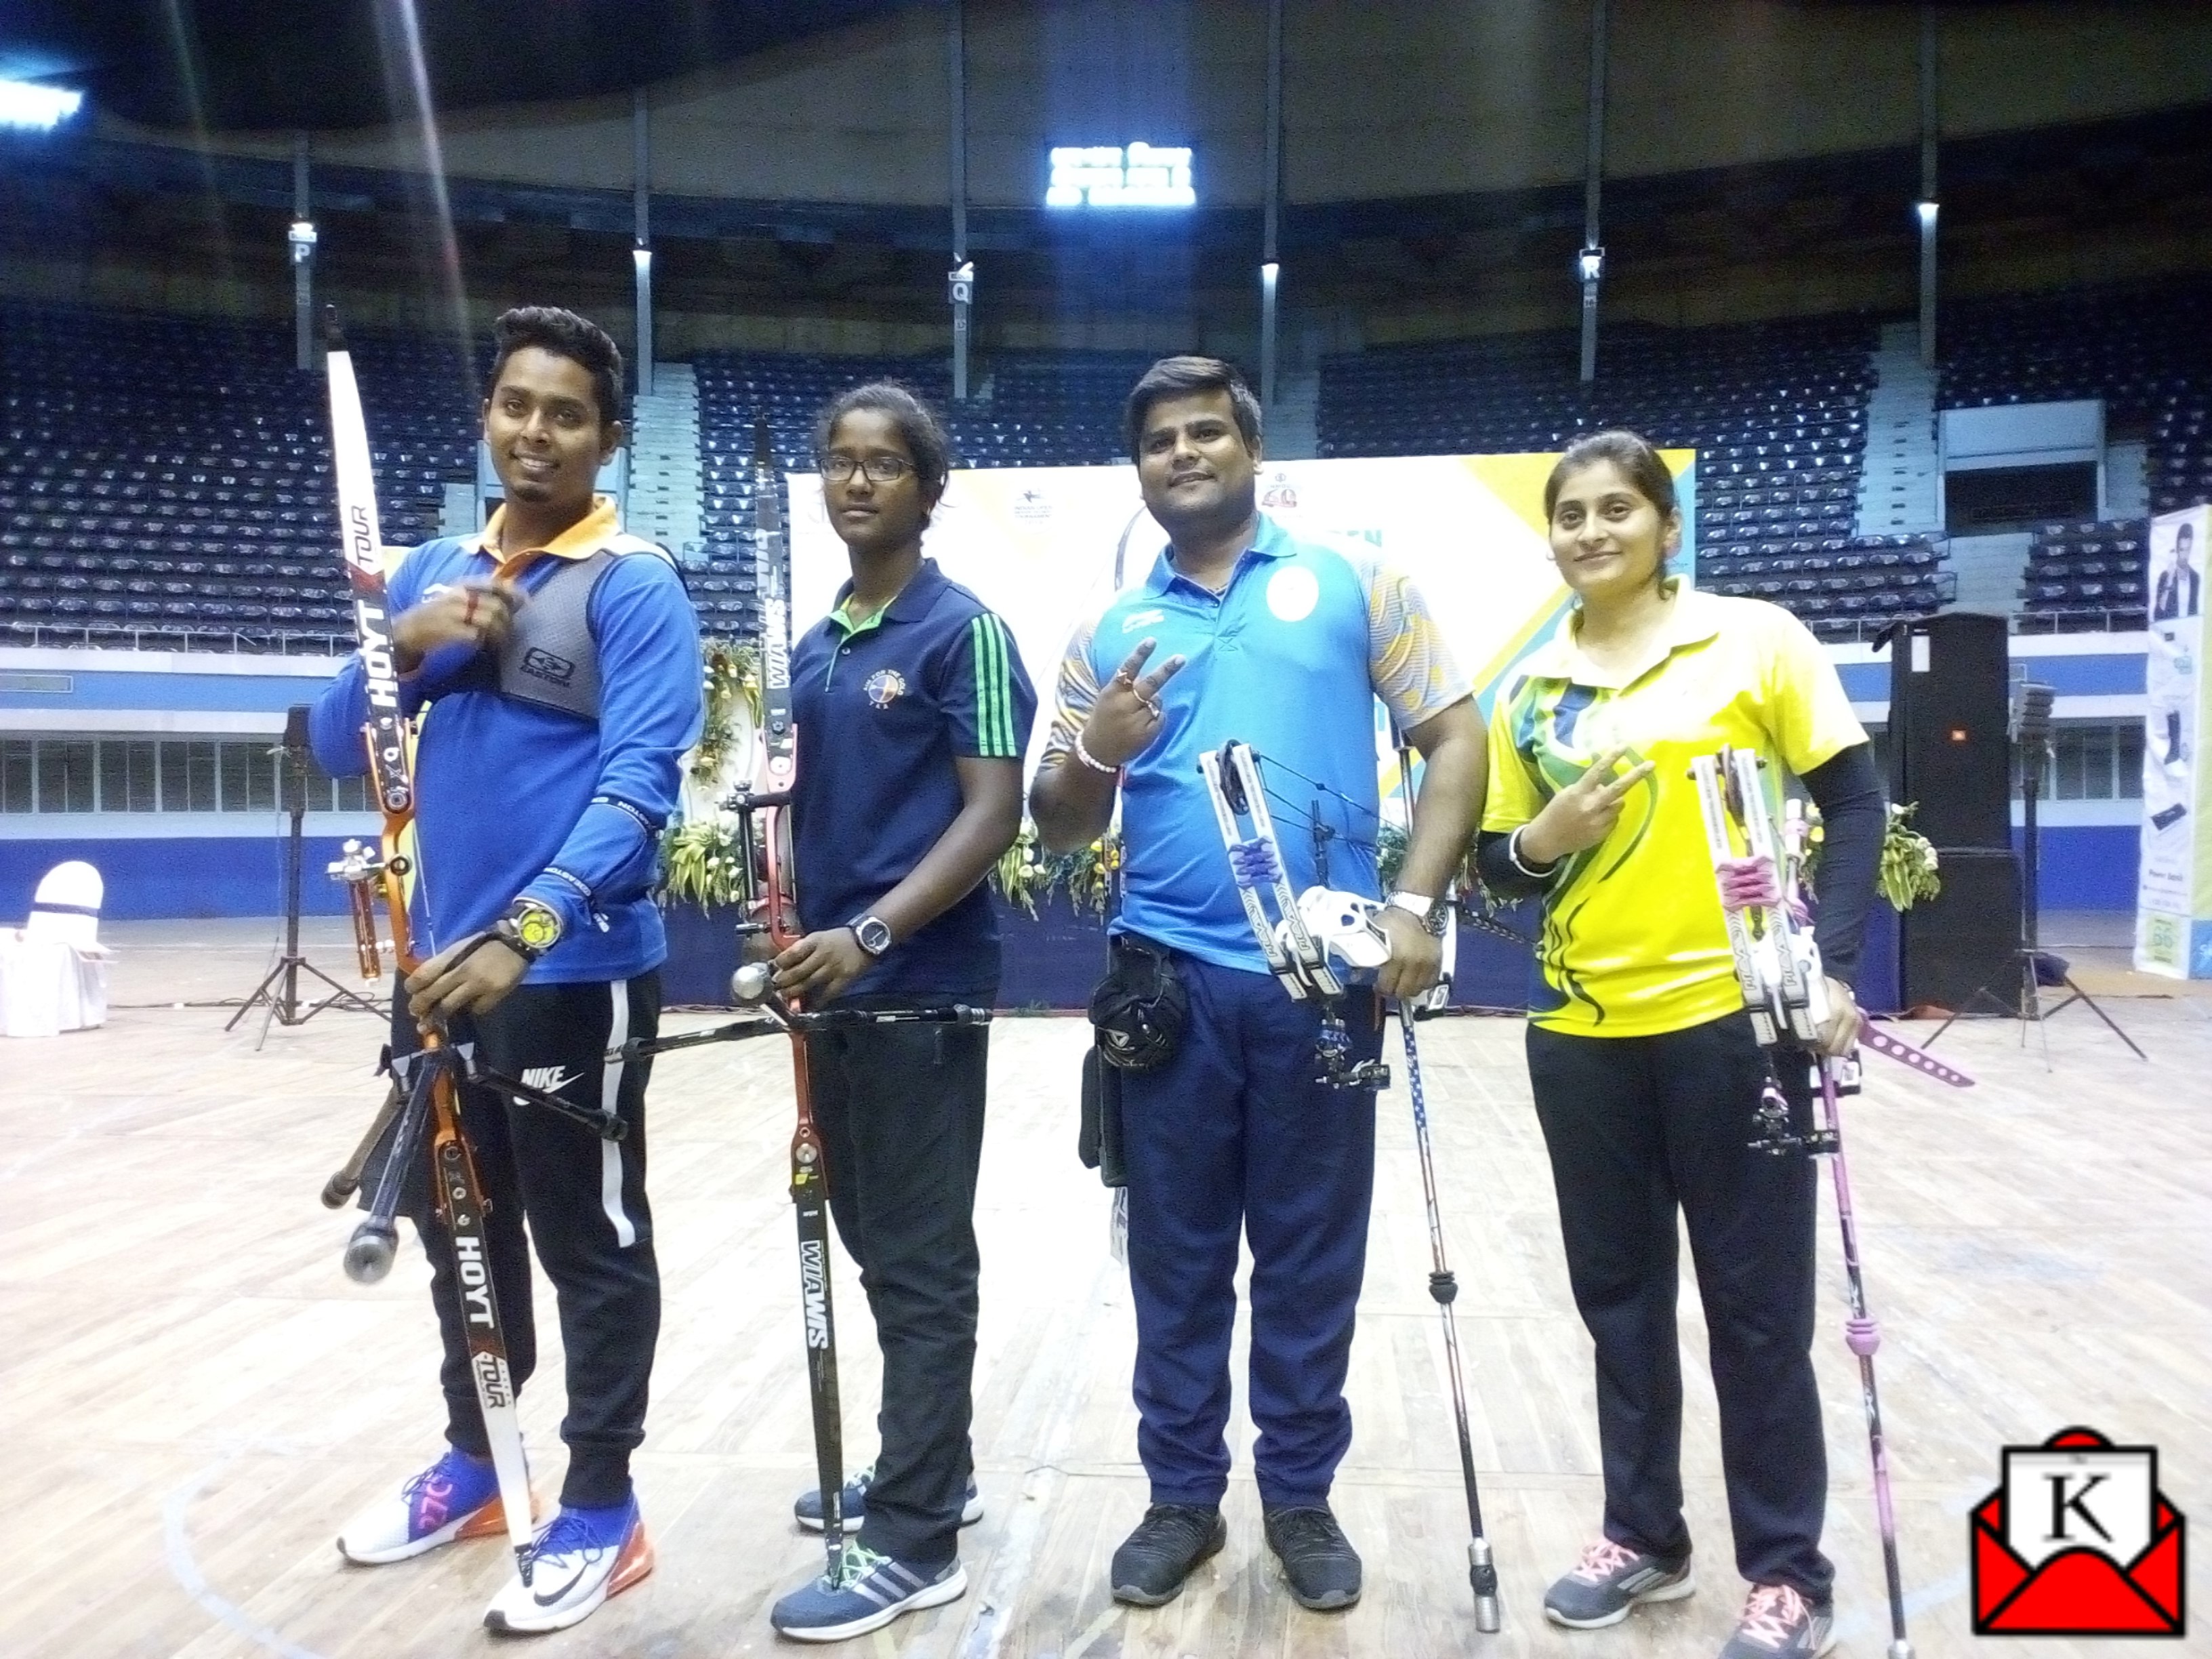 Atanu, Amit, Komolika and Sushmita Win The First Edition of Indian Open Indoor Archery Tournament